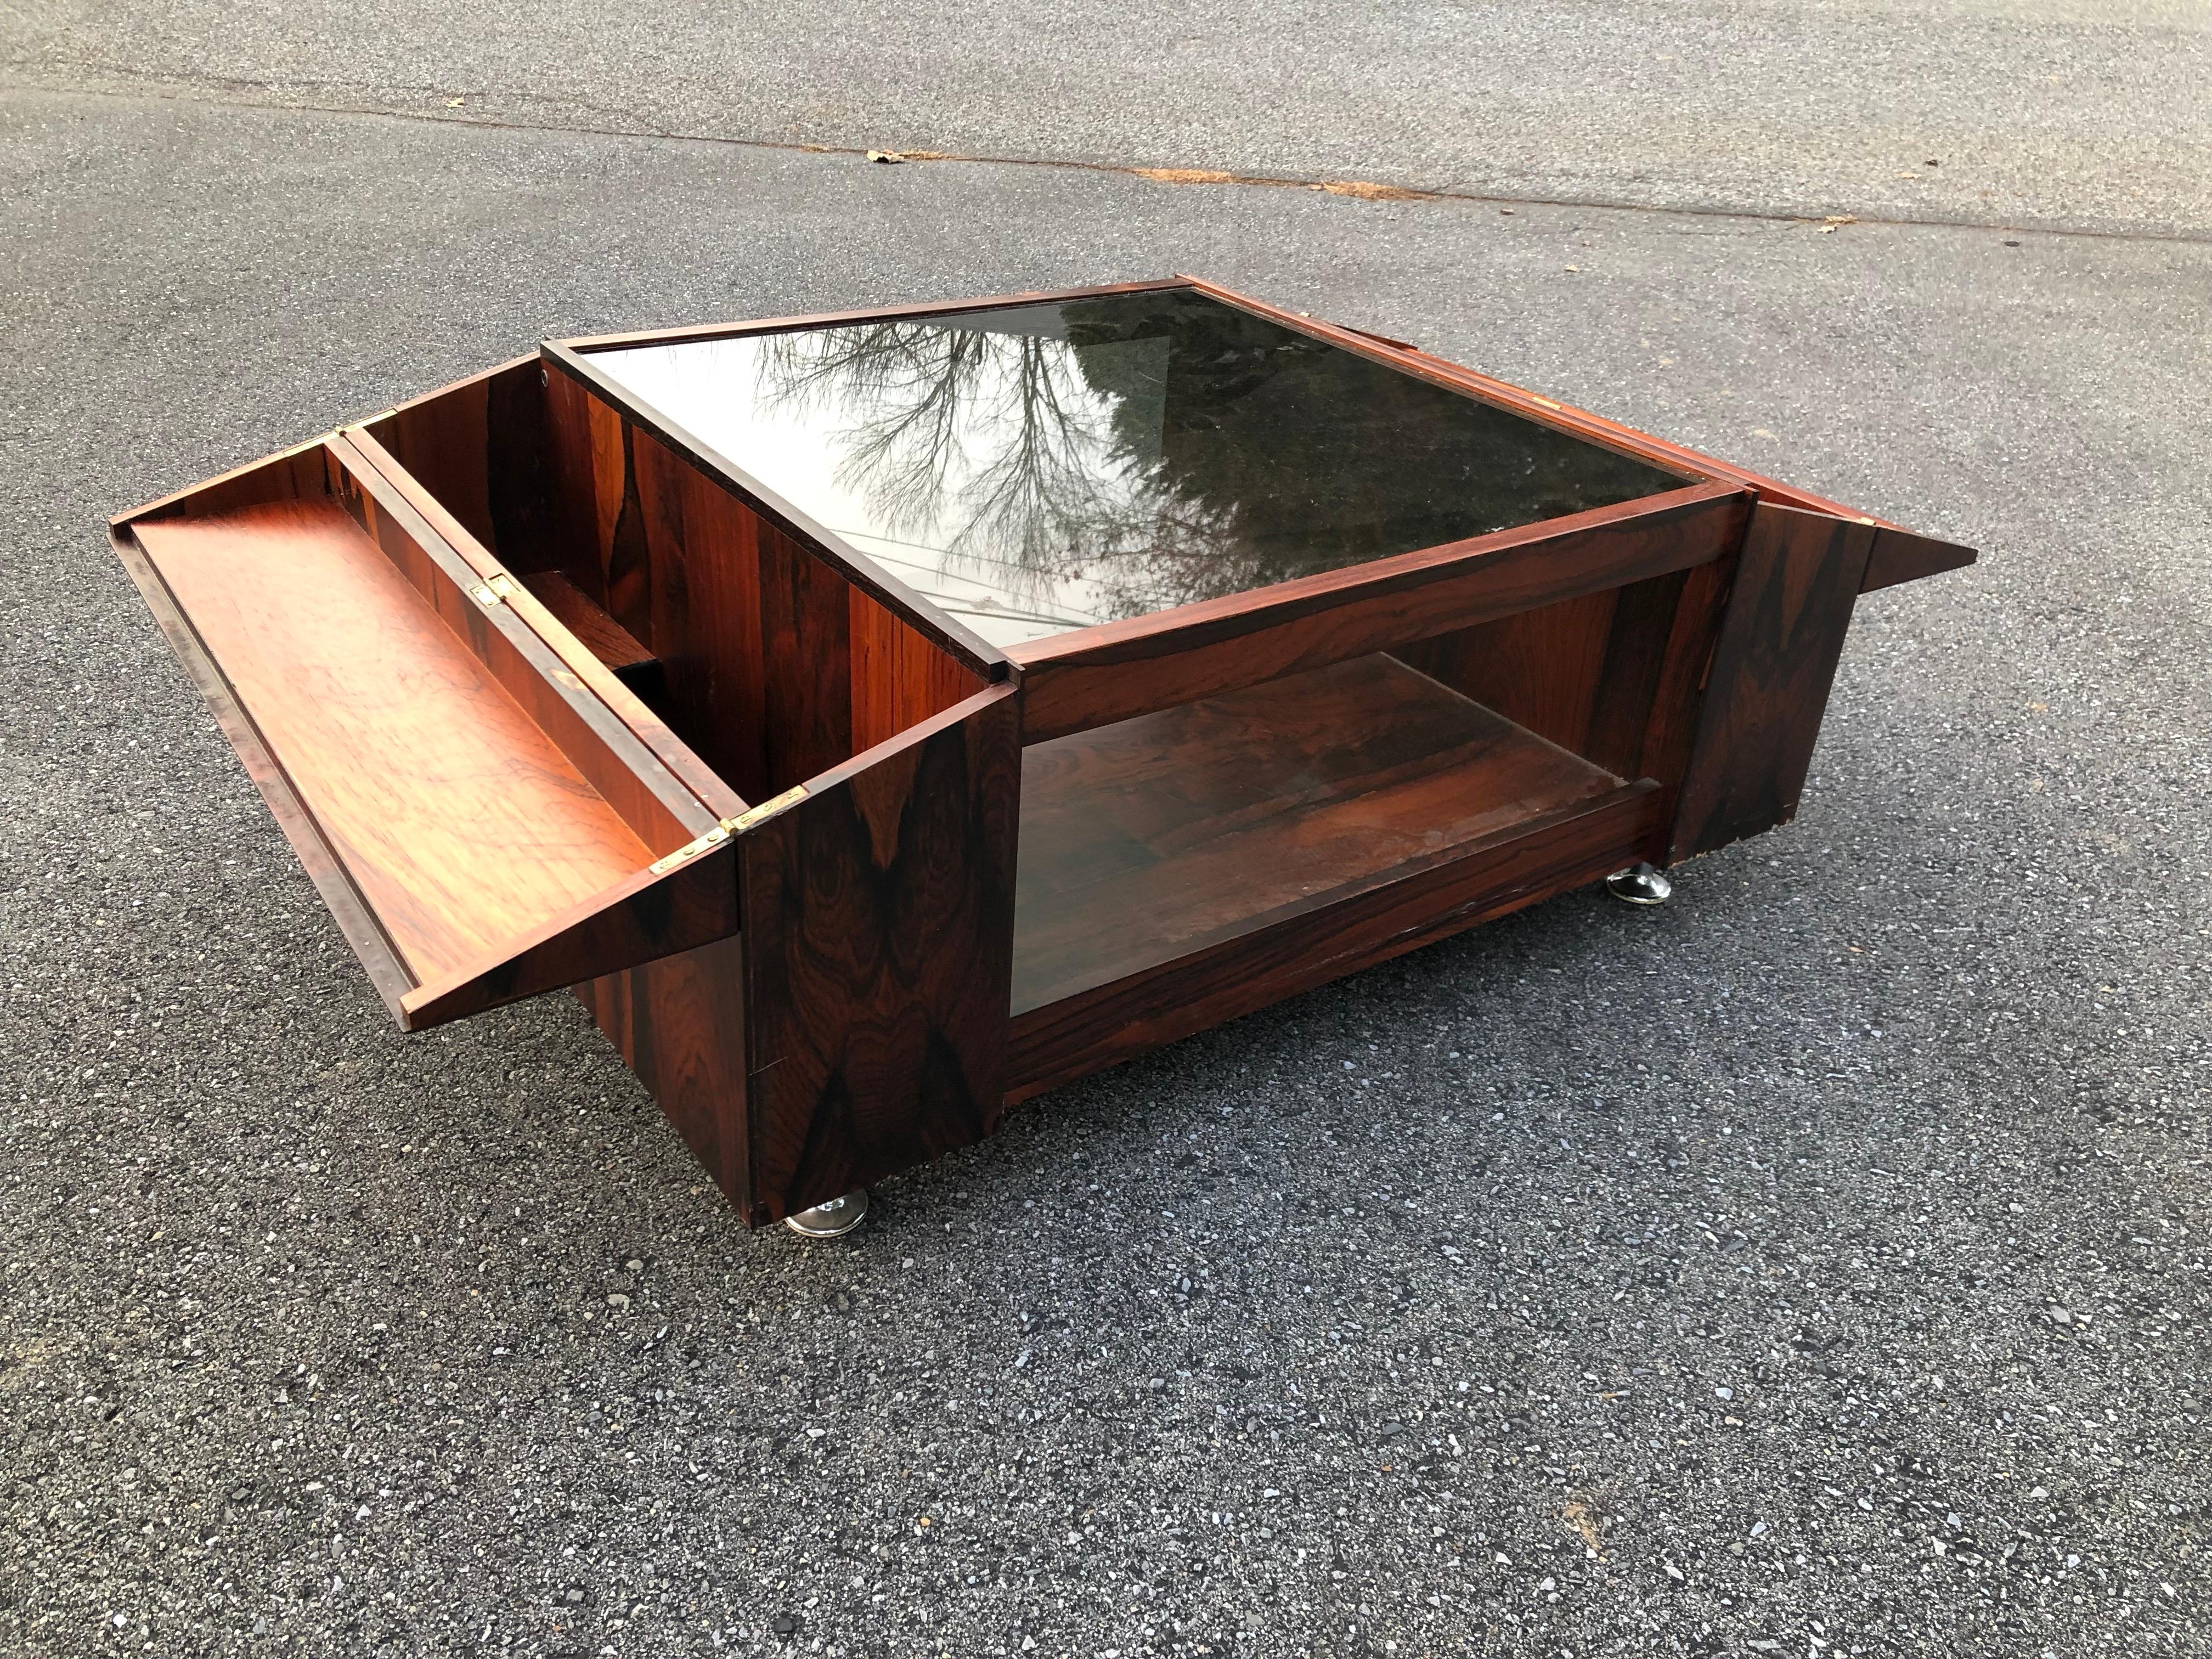 Brazilian Rosewood Coffee Table by Leif Alring im Angebot 1